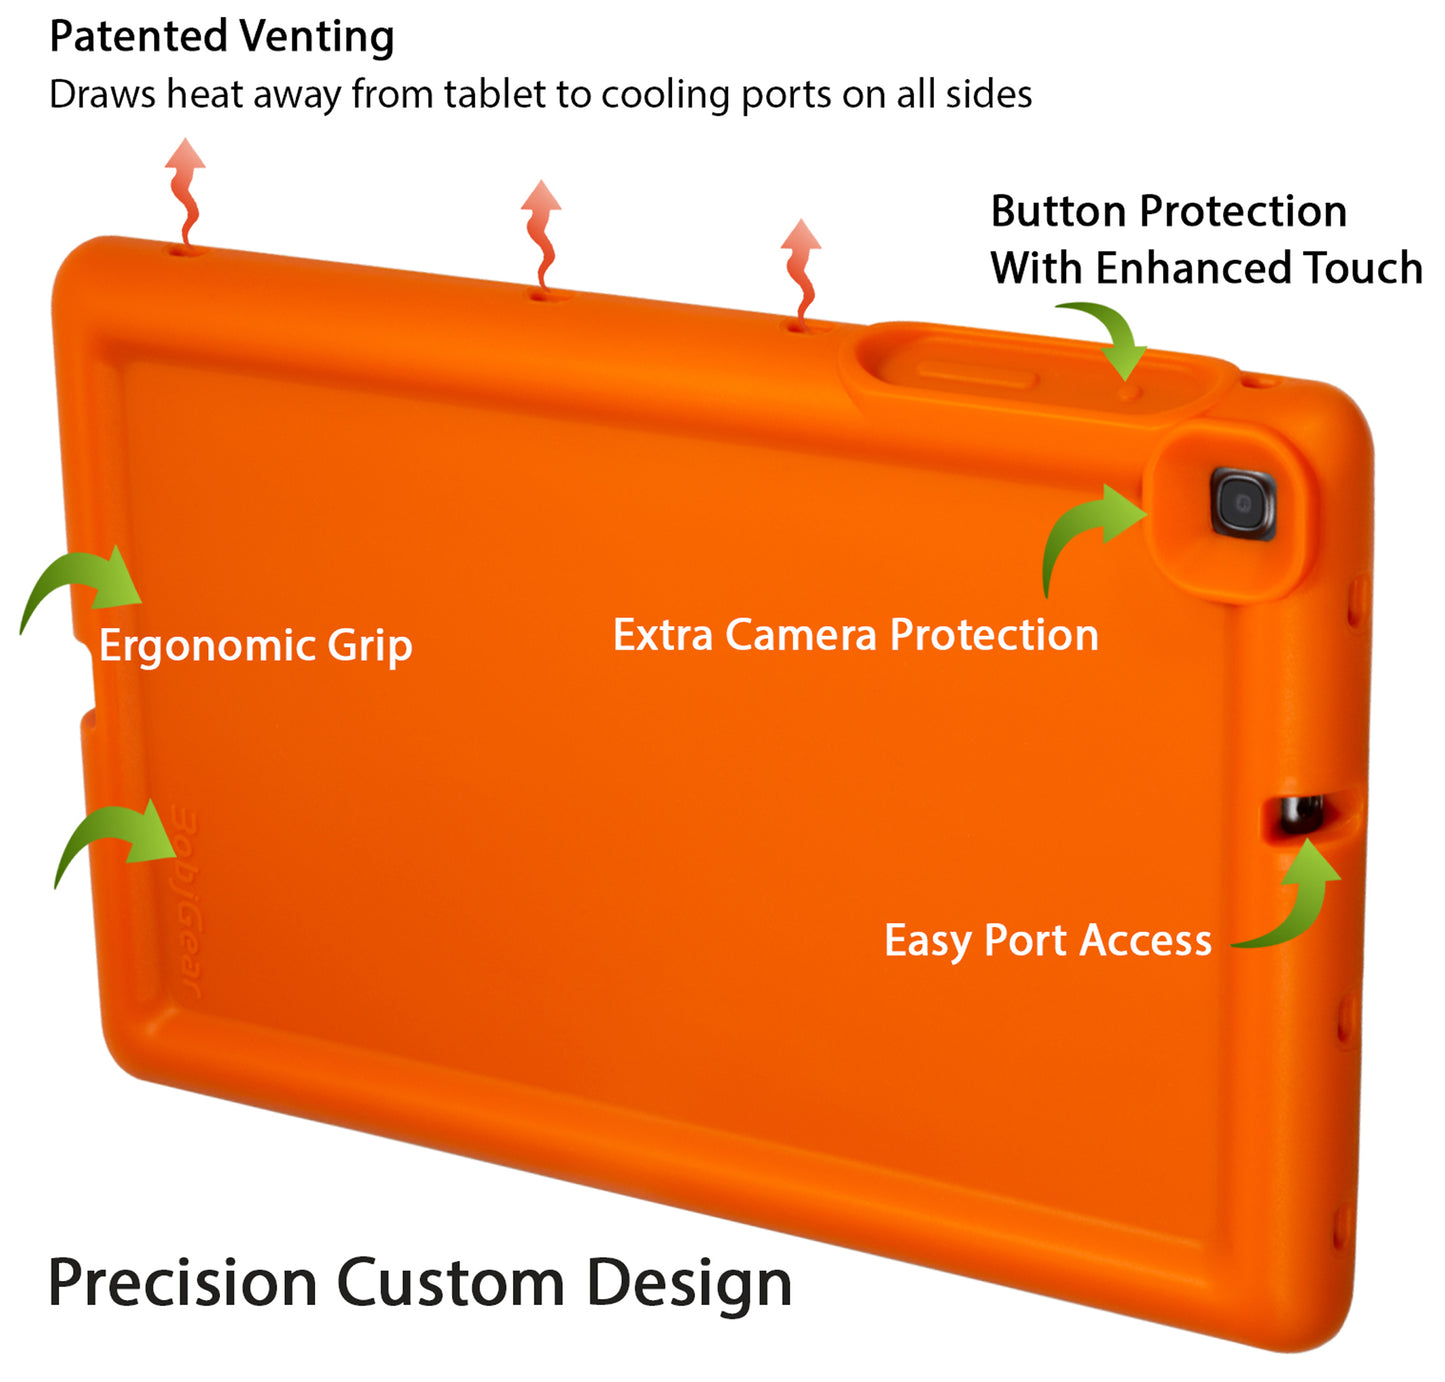 Bobj Rugged Tablet Case for Samsung Galaxy Tab A 10.1 (2019) SM-T510 SM-T515 SM-T517 - Outrageous Orange